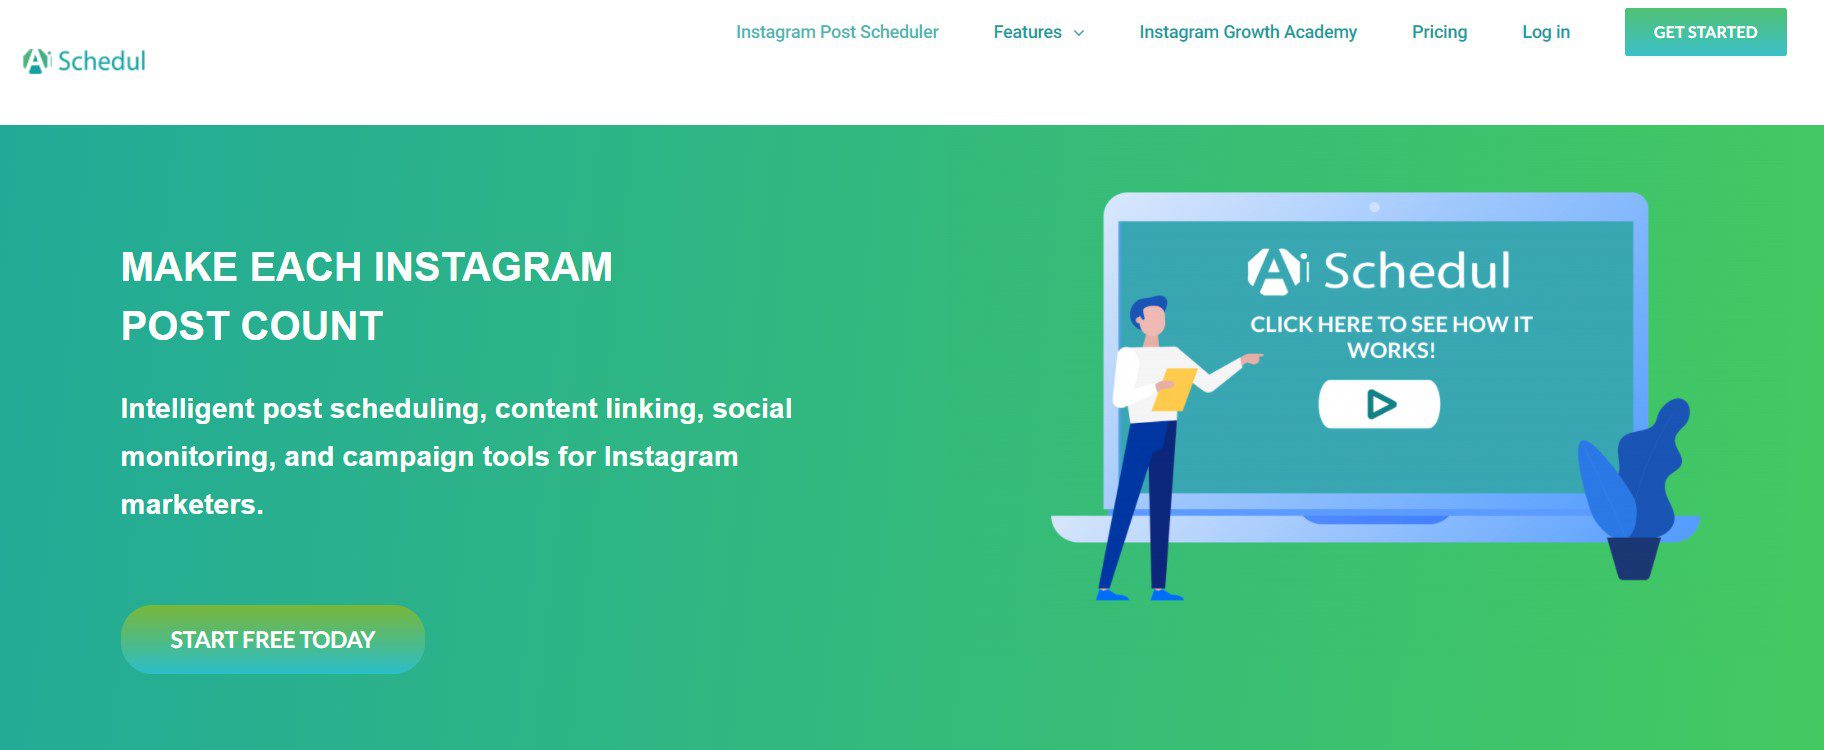 AiSchedul's content scheduling feature allows you to easily schedule Instagram posts.